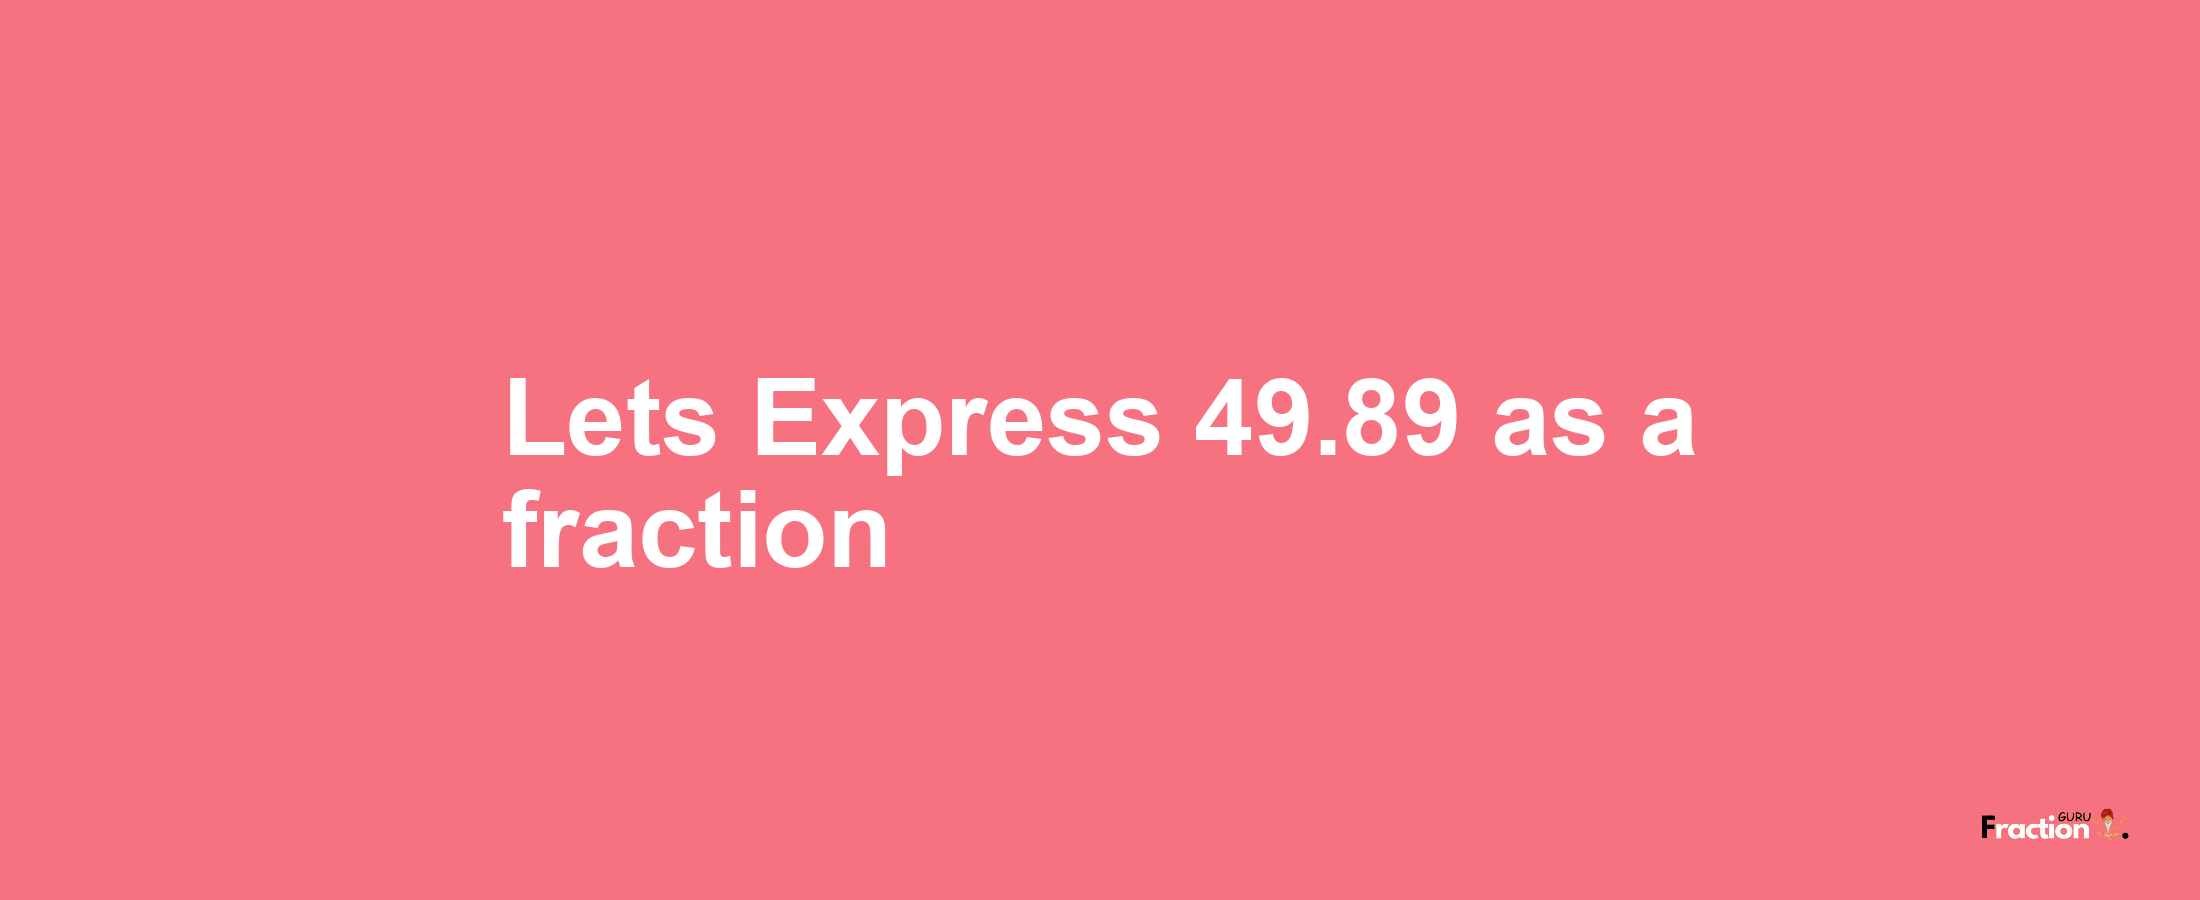 Lets Express 49.89 as afraction